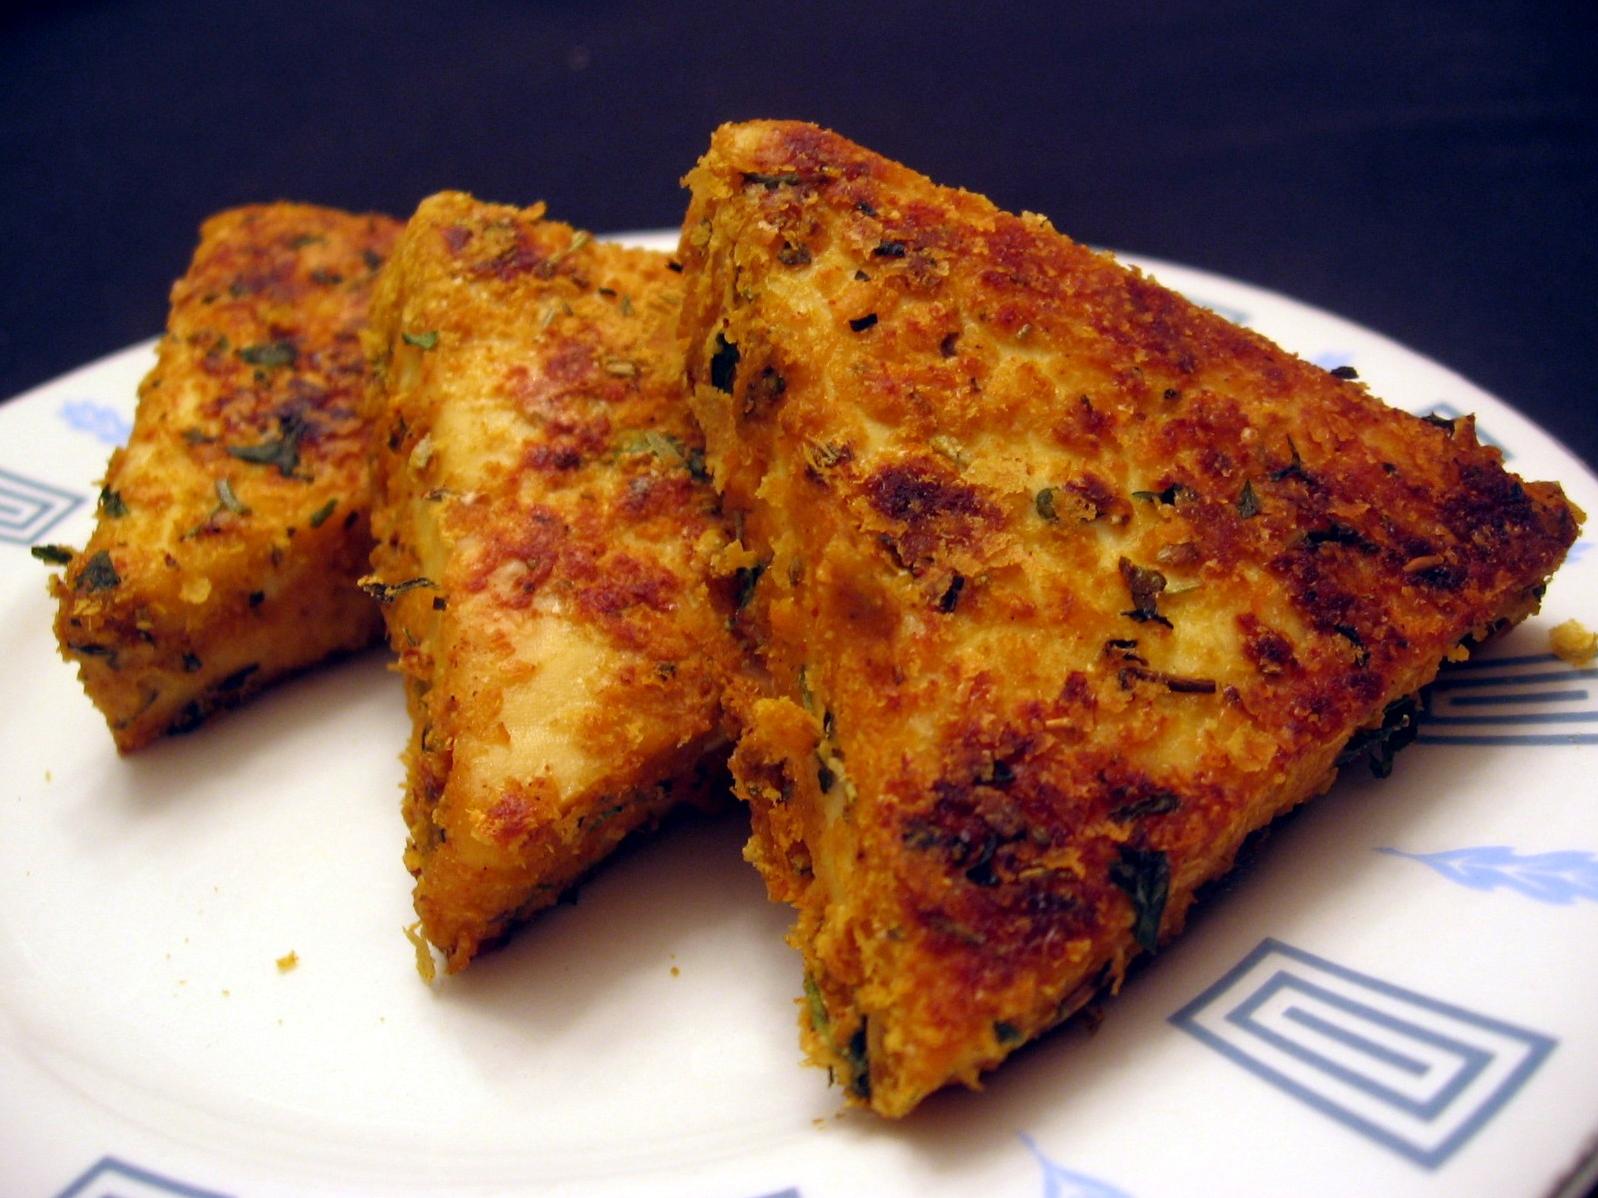  Get ready to satisfy your cravings with this crispy and delicious Southern Fried Tofu.